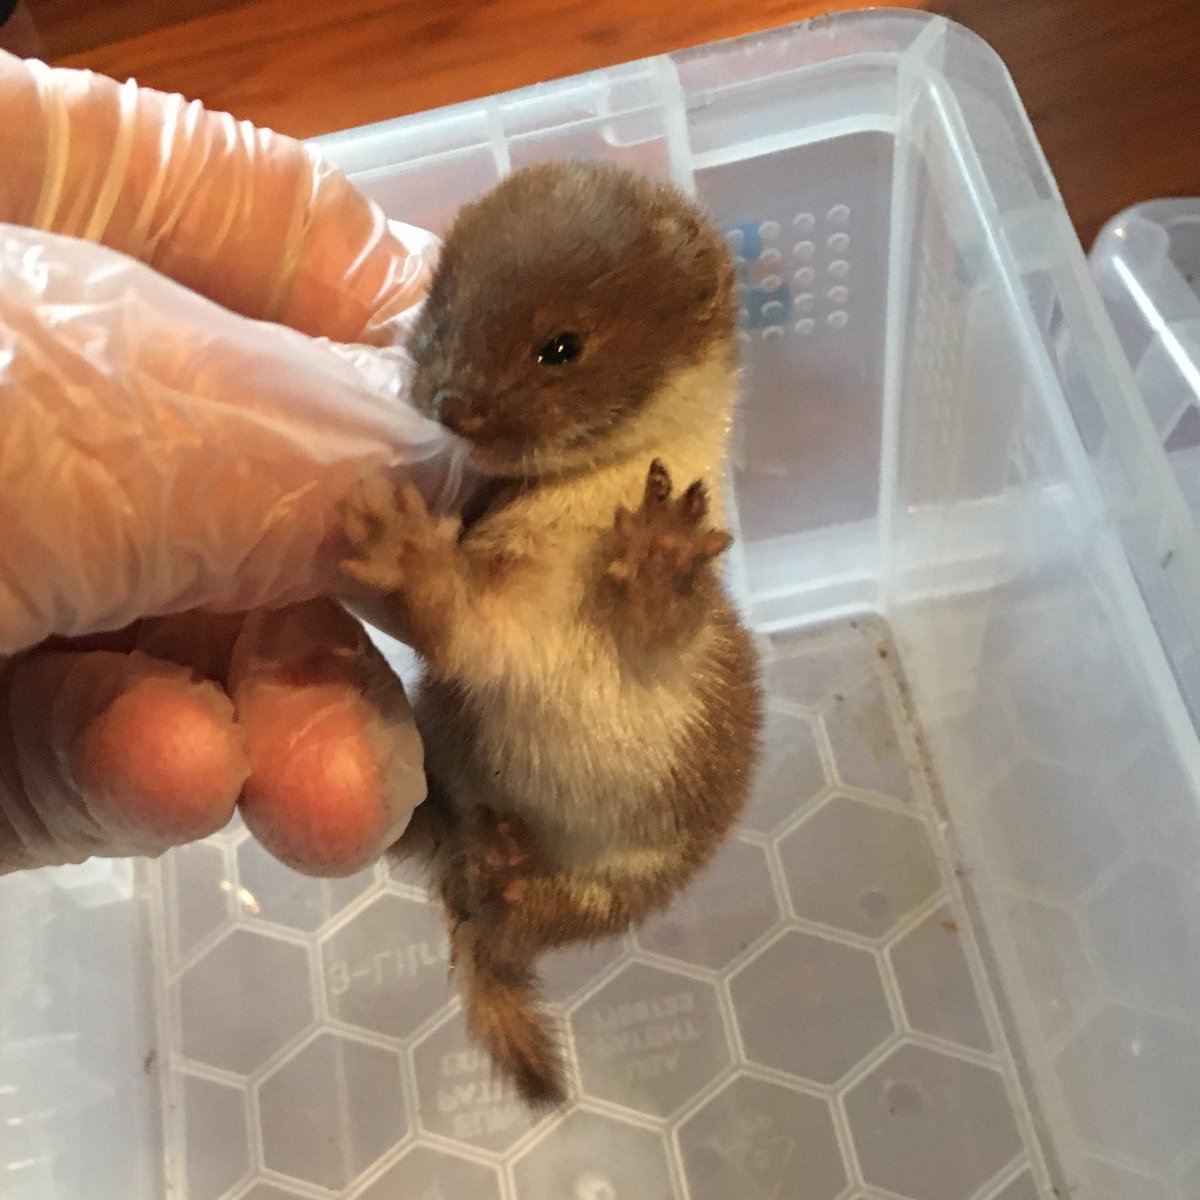 Never rains but it pours. Look what someone found on their doorstep! A young Weasel. Was cold and weak with no sign of mum so now in care.
#weasel #mustelid #wildliferescue #wildliferehab #wildliferehabber
@Mammal_Society @labmammalgroup @BBCSpringwatch @WildlifeMag @ScotWildlife